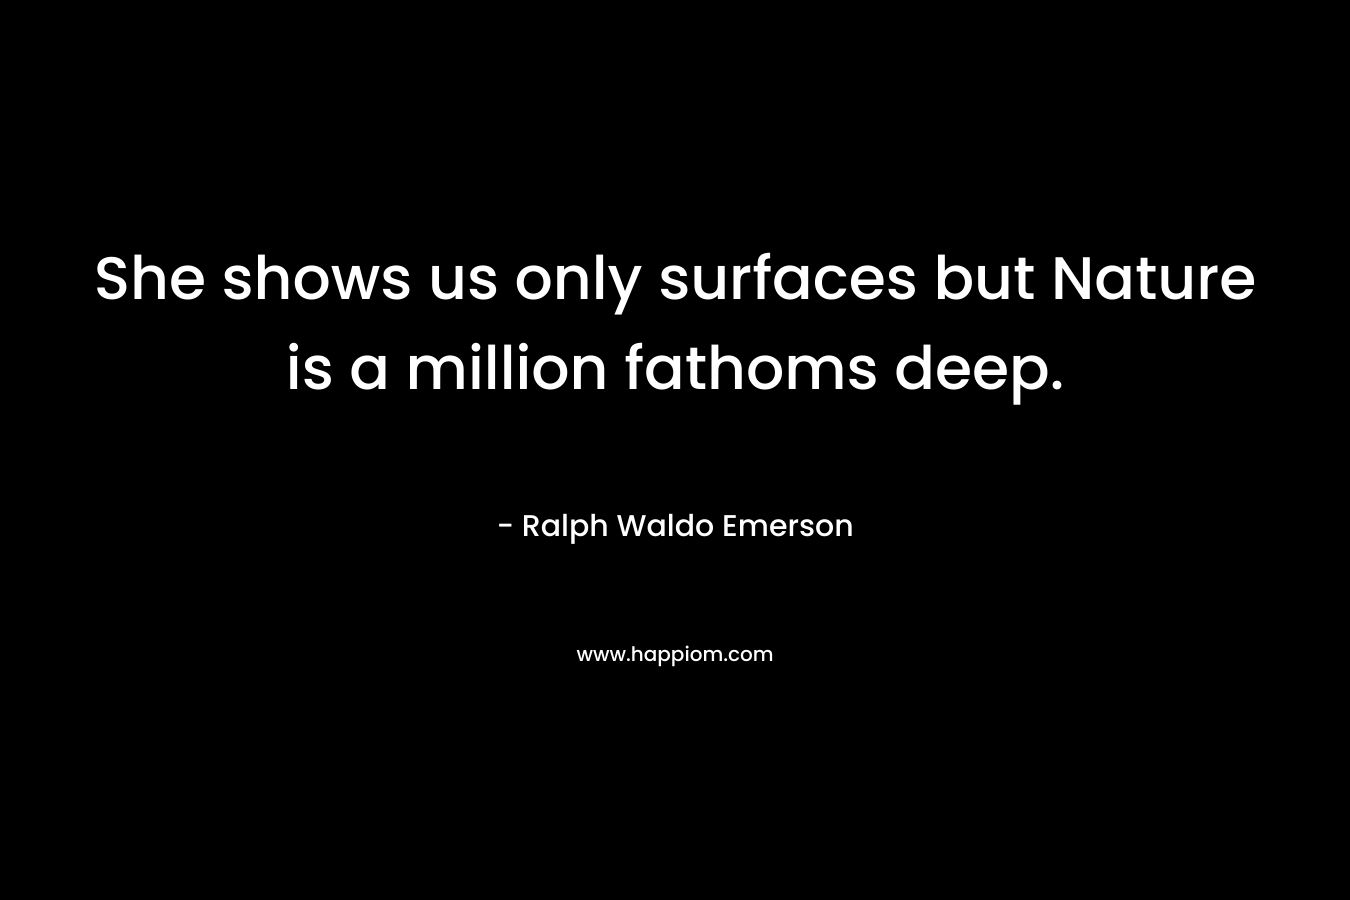 She shows us only surfaces but Nature is a million fathoms deep. – Ralph Waldo Emerson